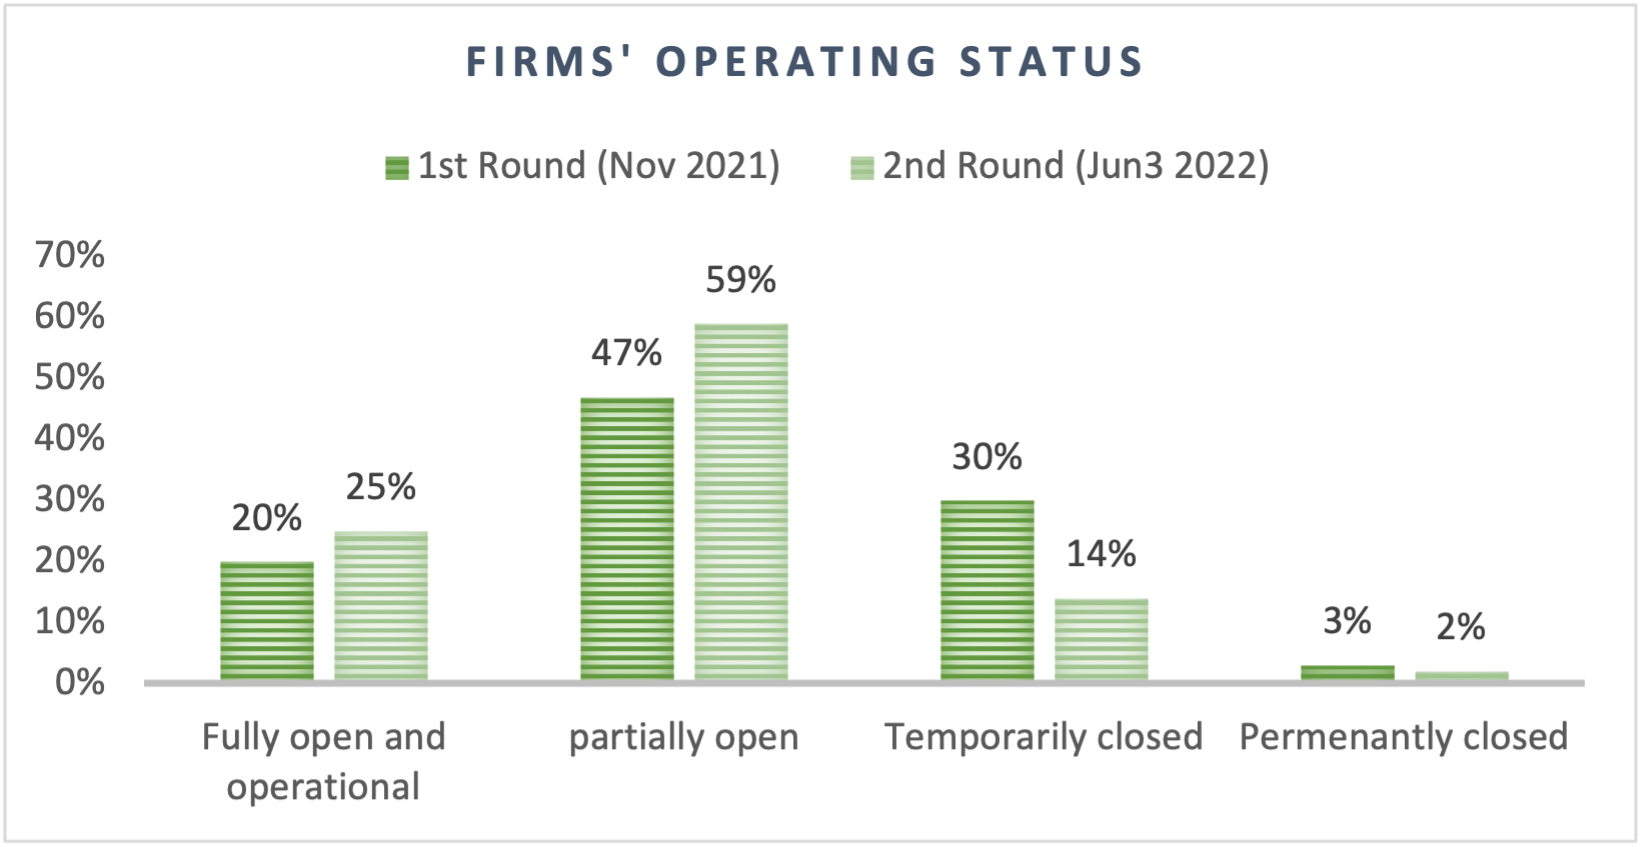 Figure 5: AFG firms’ operating status (World Bank data, author’s visualization)